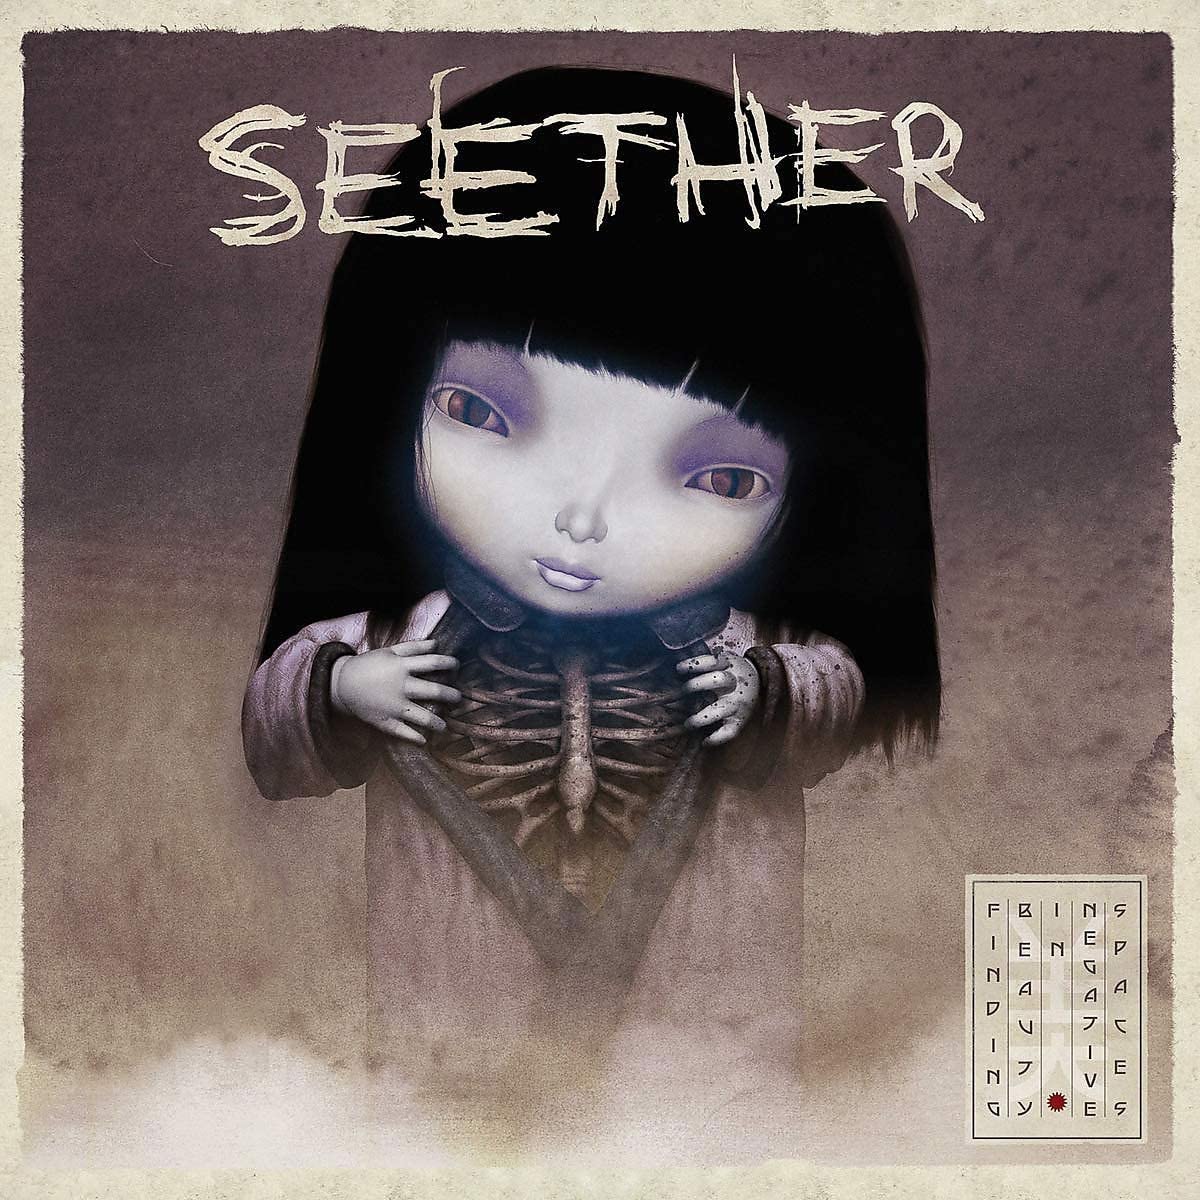 Seether - Finding Beauty in Negative Spaces - 2LP